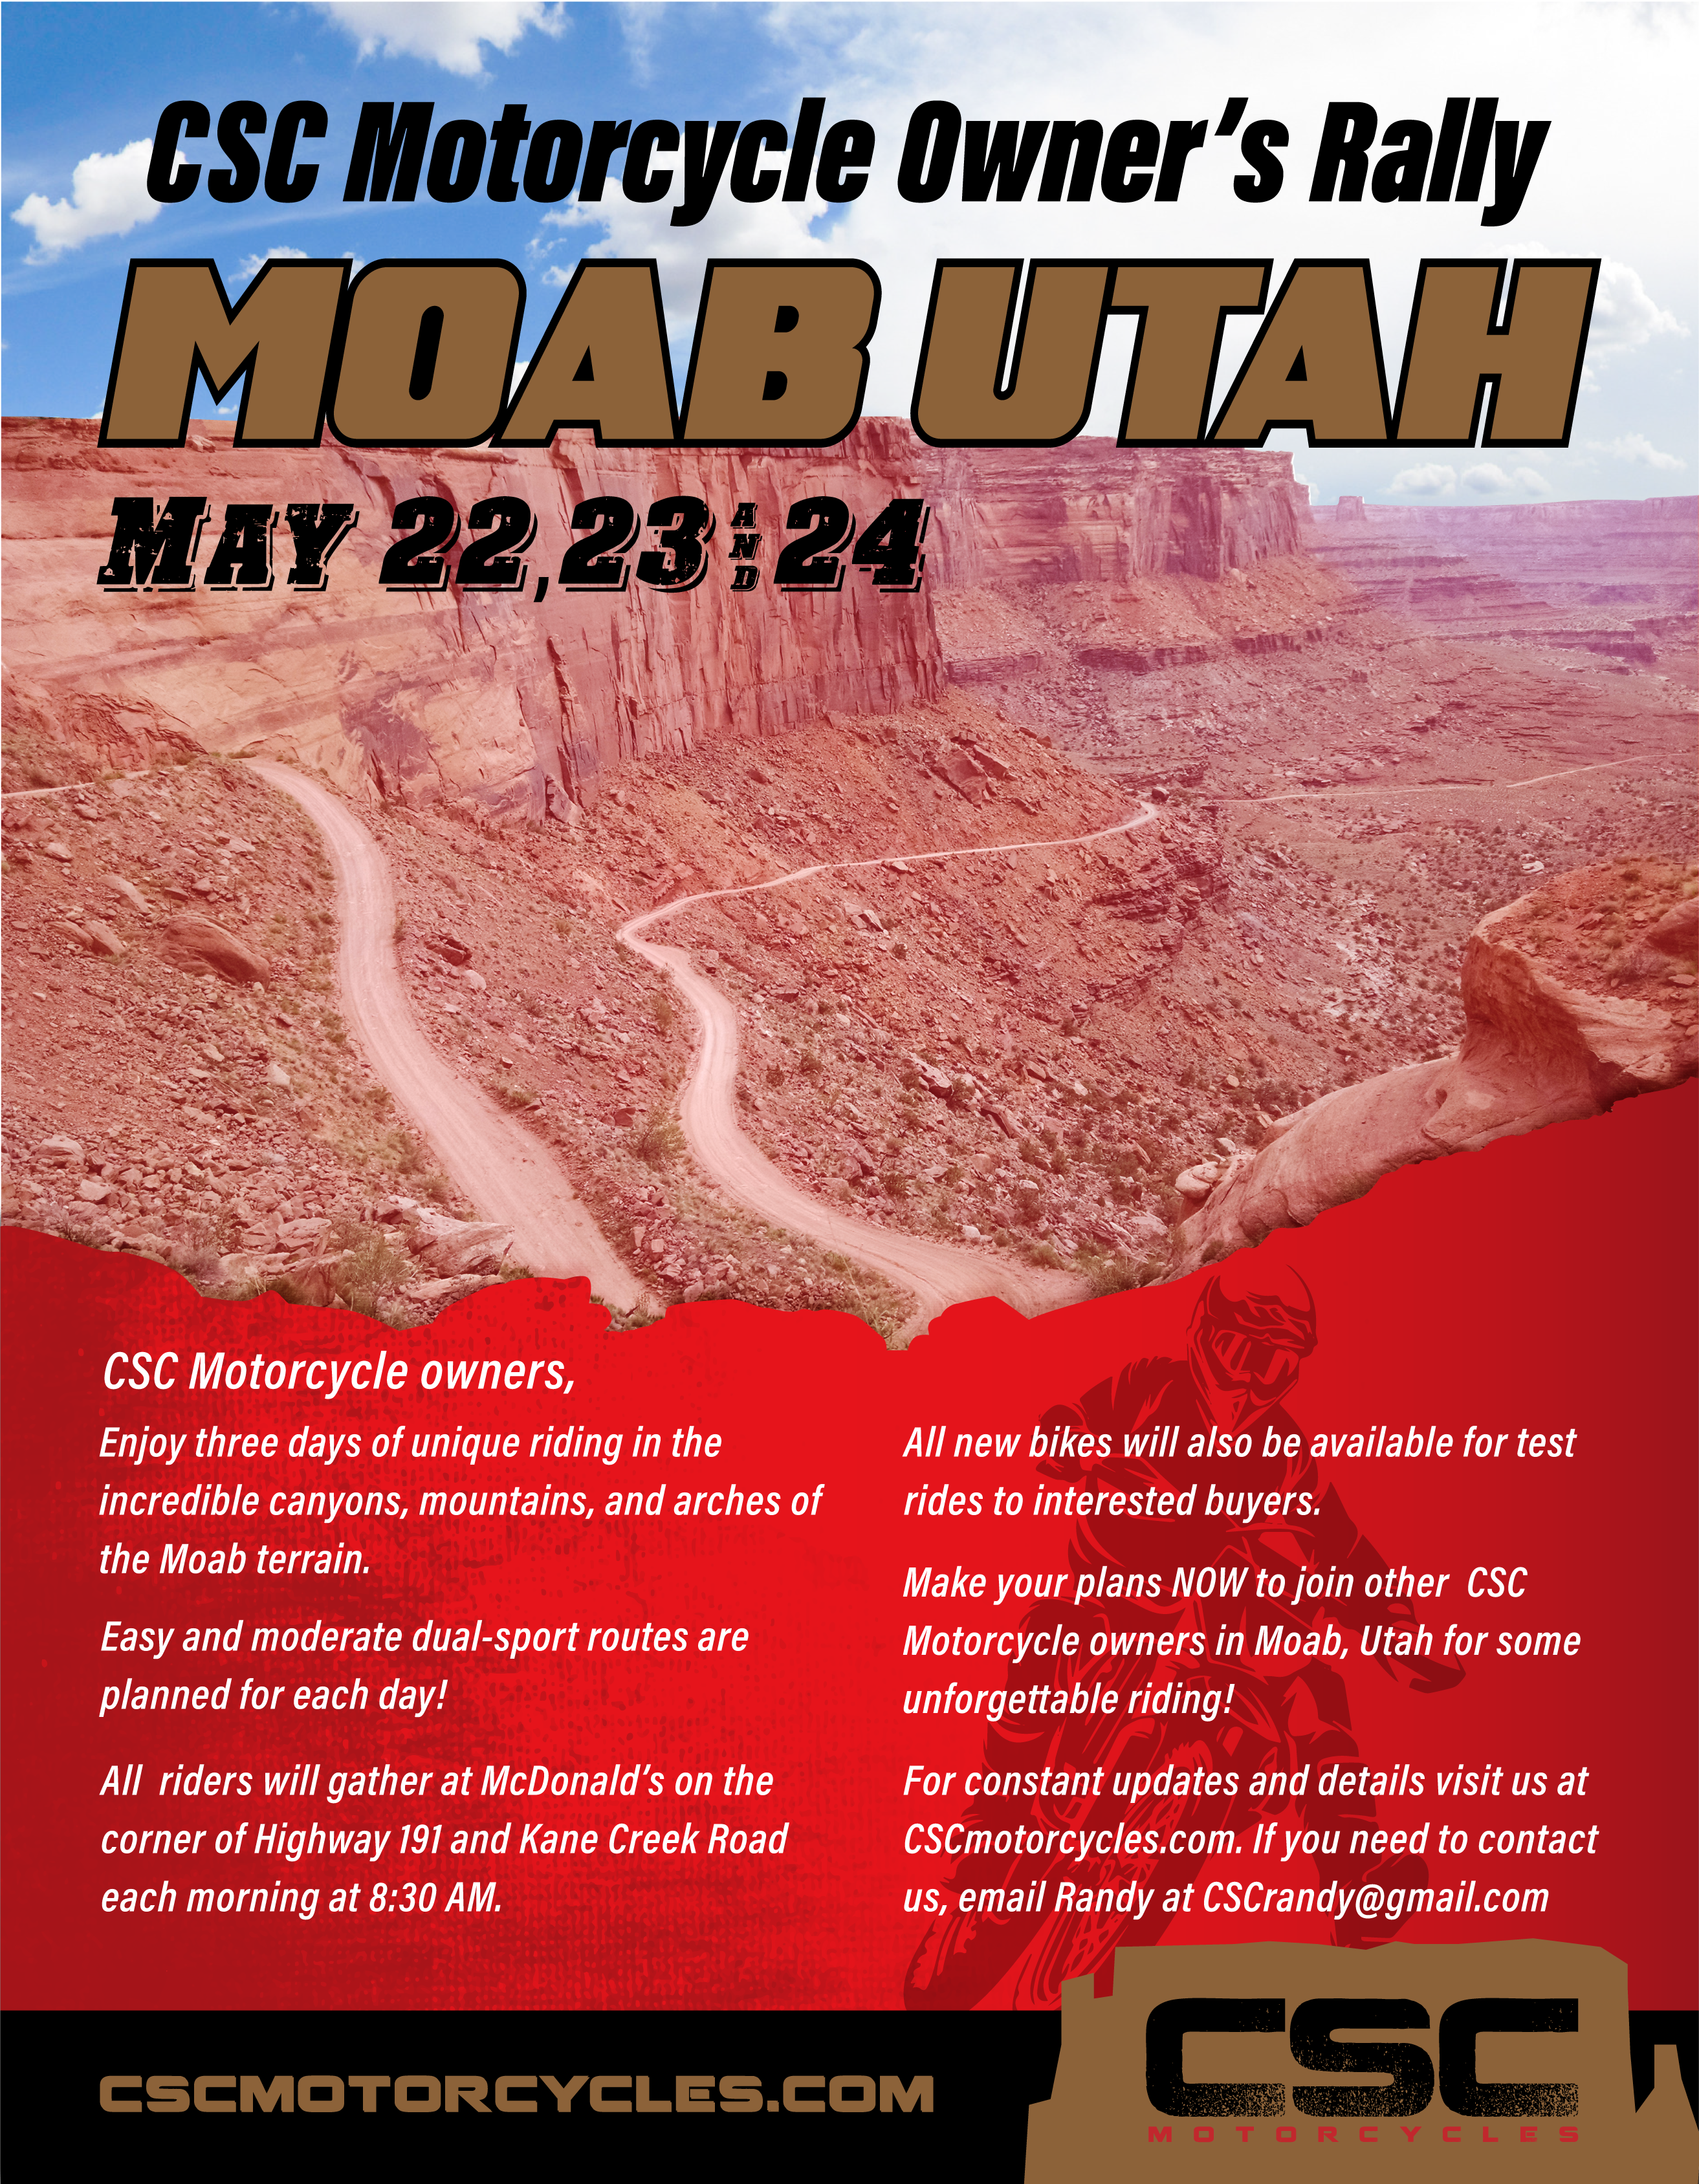 CSC Motorcycles Owner's Rally Event in Moab, Utah. May 22, 23, & 24 2019.